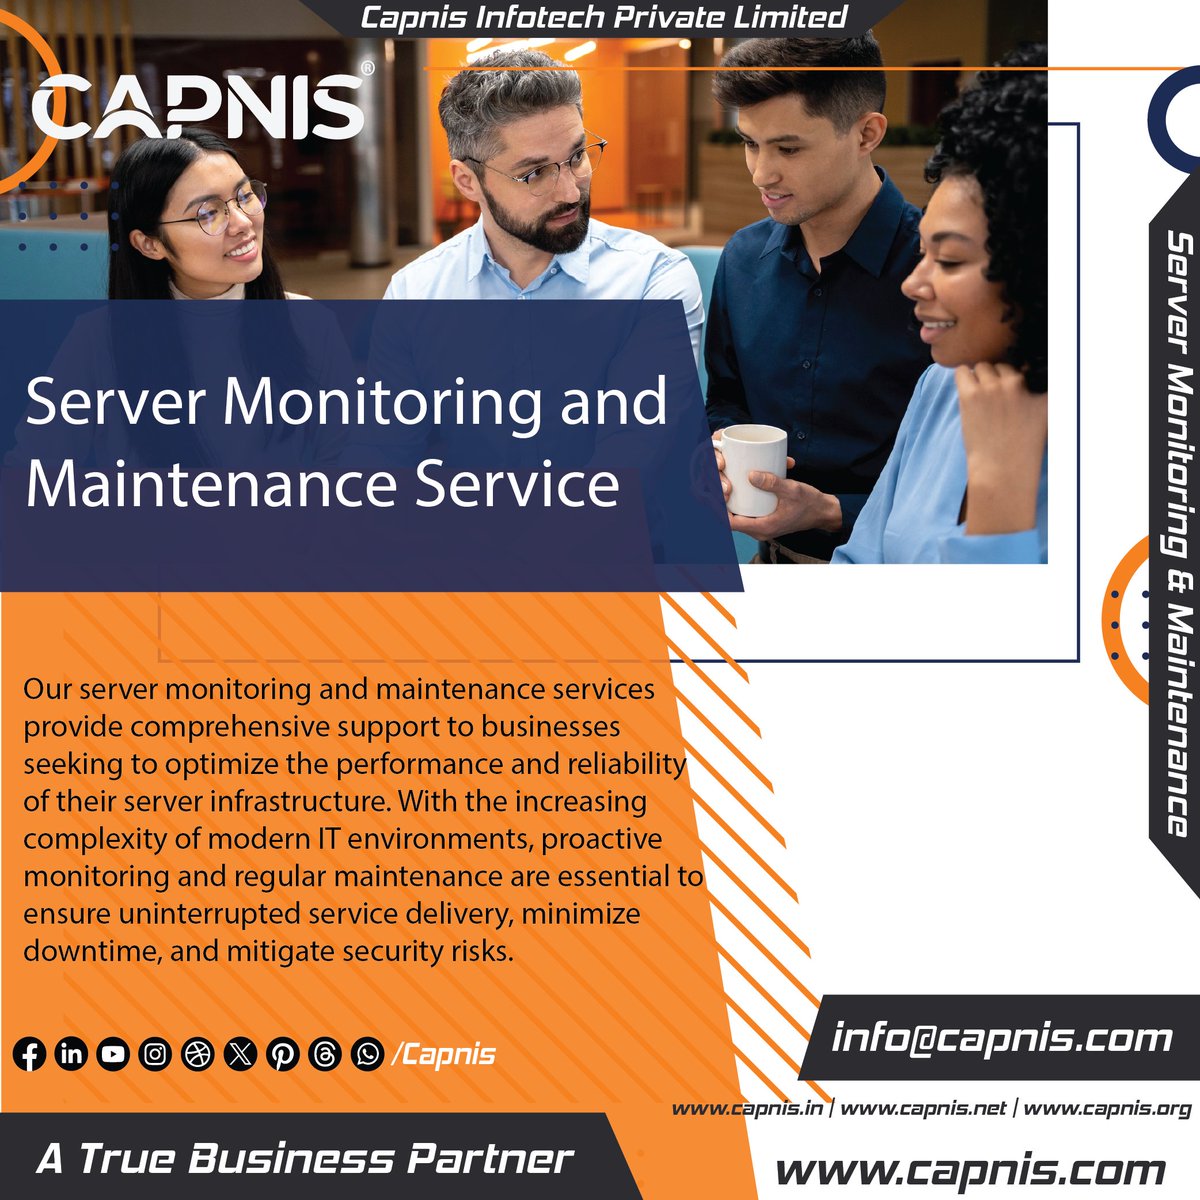 At Capnis Infotech Private Limited, our server monitoring and maintenance services offer:

capnis.com/managed-servic…

#Capnis #CapnisInfotech #ServerCare #PerformanceBoost #SecureServe #DataGuard